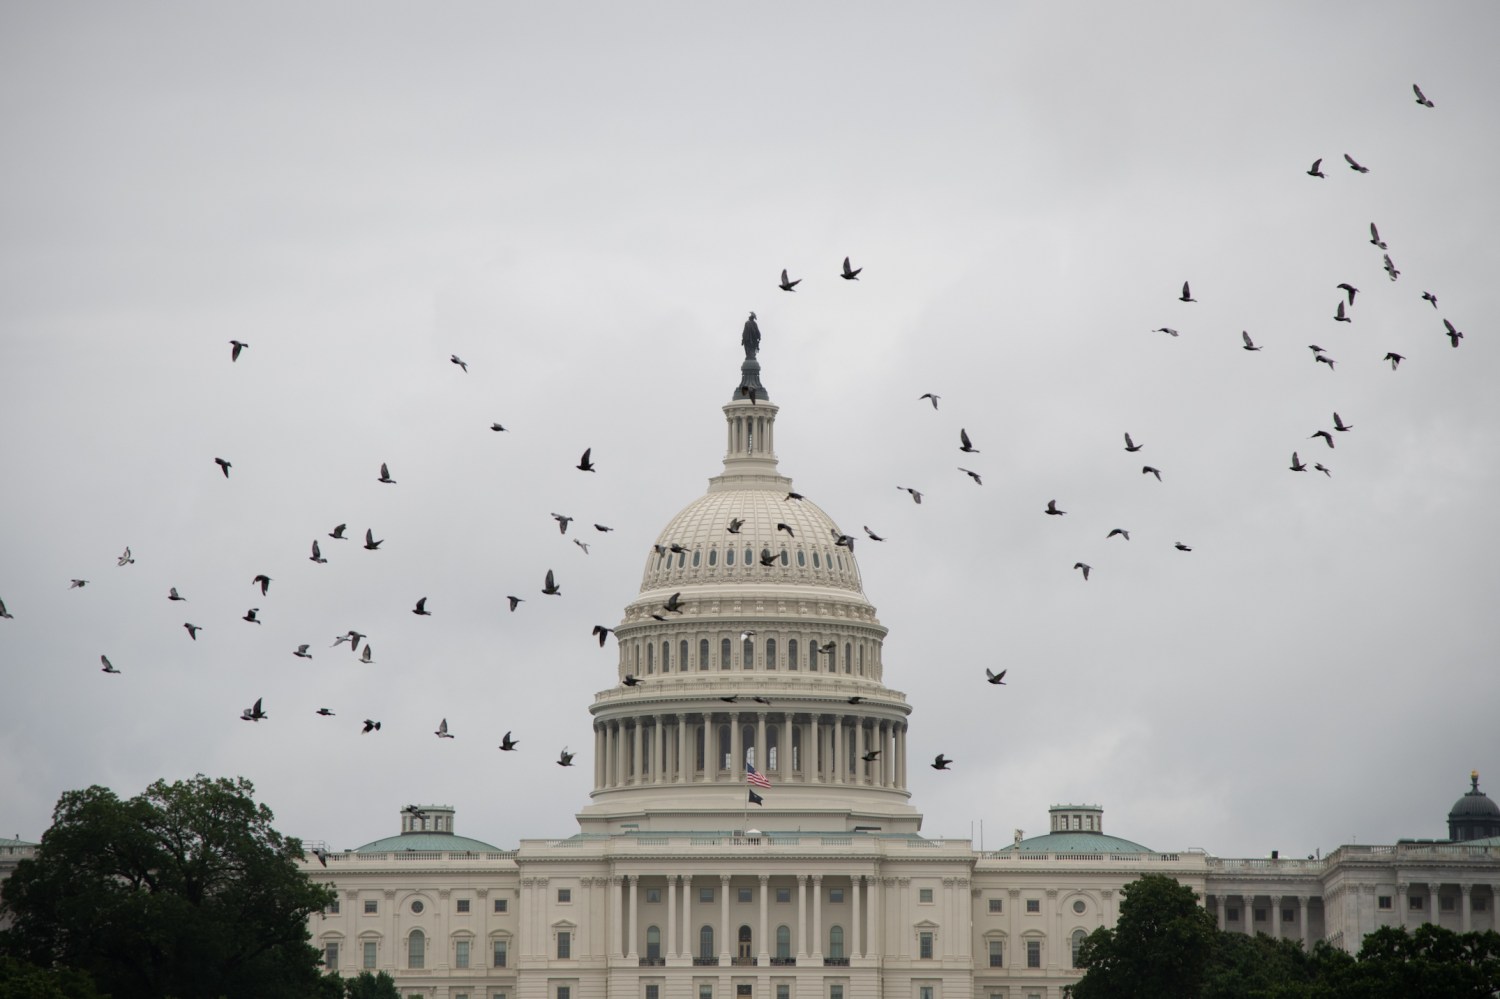 A general view of the U.S. Capitol Building on a rainy day in Washington, D.C., on August 16, 2020 amid the Coronavirus pandemic. Today, as President Trump has to discredit mail-in voting, the House Oversight Committee announced an emergency hearing and invited recent Trump appointee, and Republican megadonor, Postmaster General Louis DeJoy to testify about ongoing problems with mail delivery ahead of the 2020 elections. (Graeme Sloan/Sipa USA)No Use UK. No Use Germany.